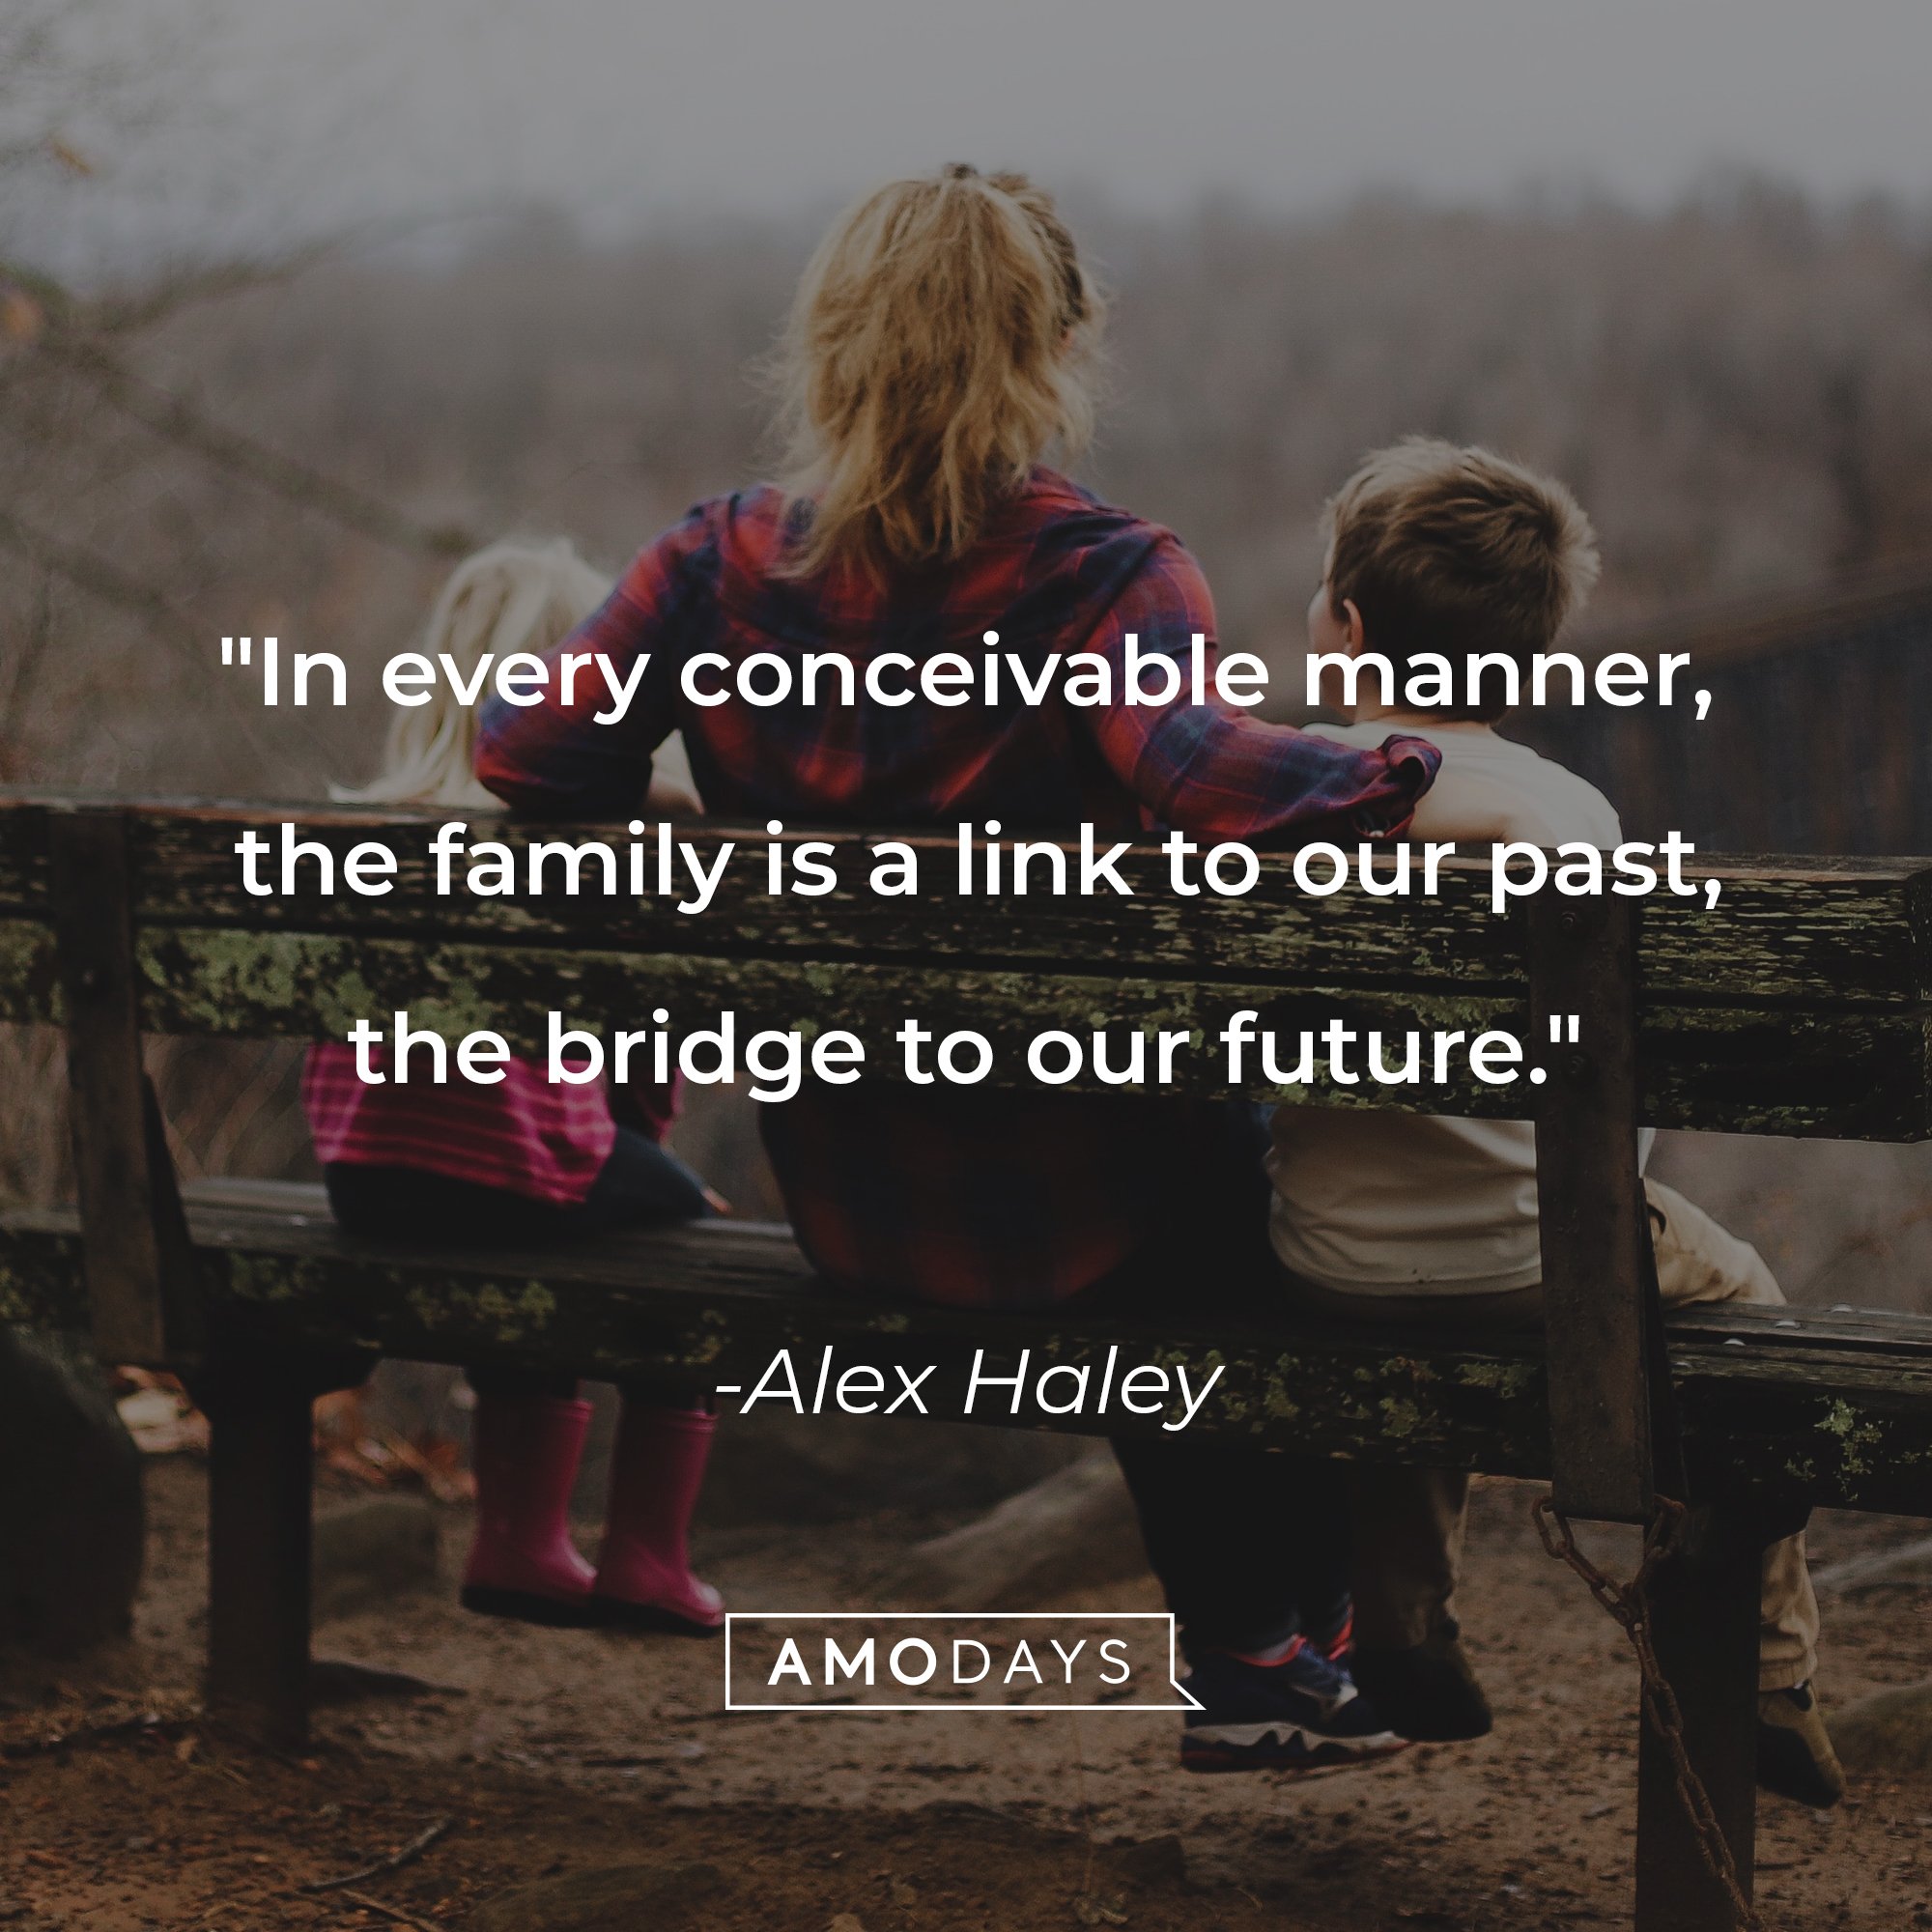 Alex Haley's quote: "In every conceivable manner, the family is a link to our past, the bridge to our future." | Image: AmoDays